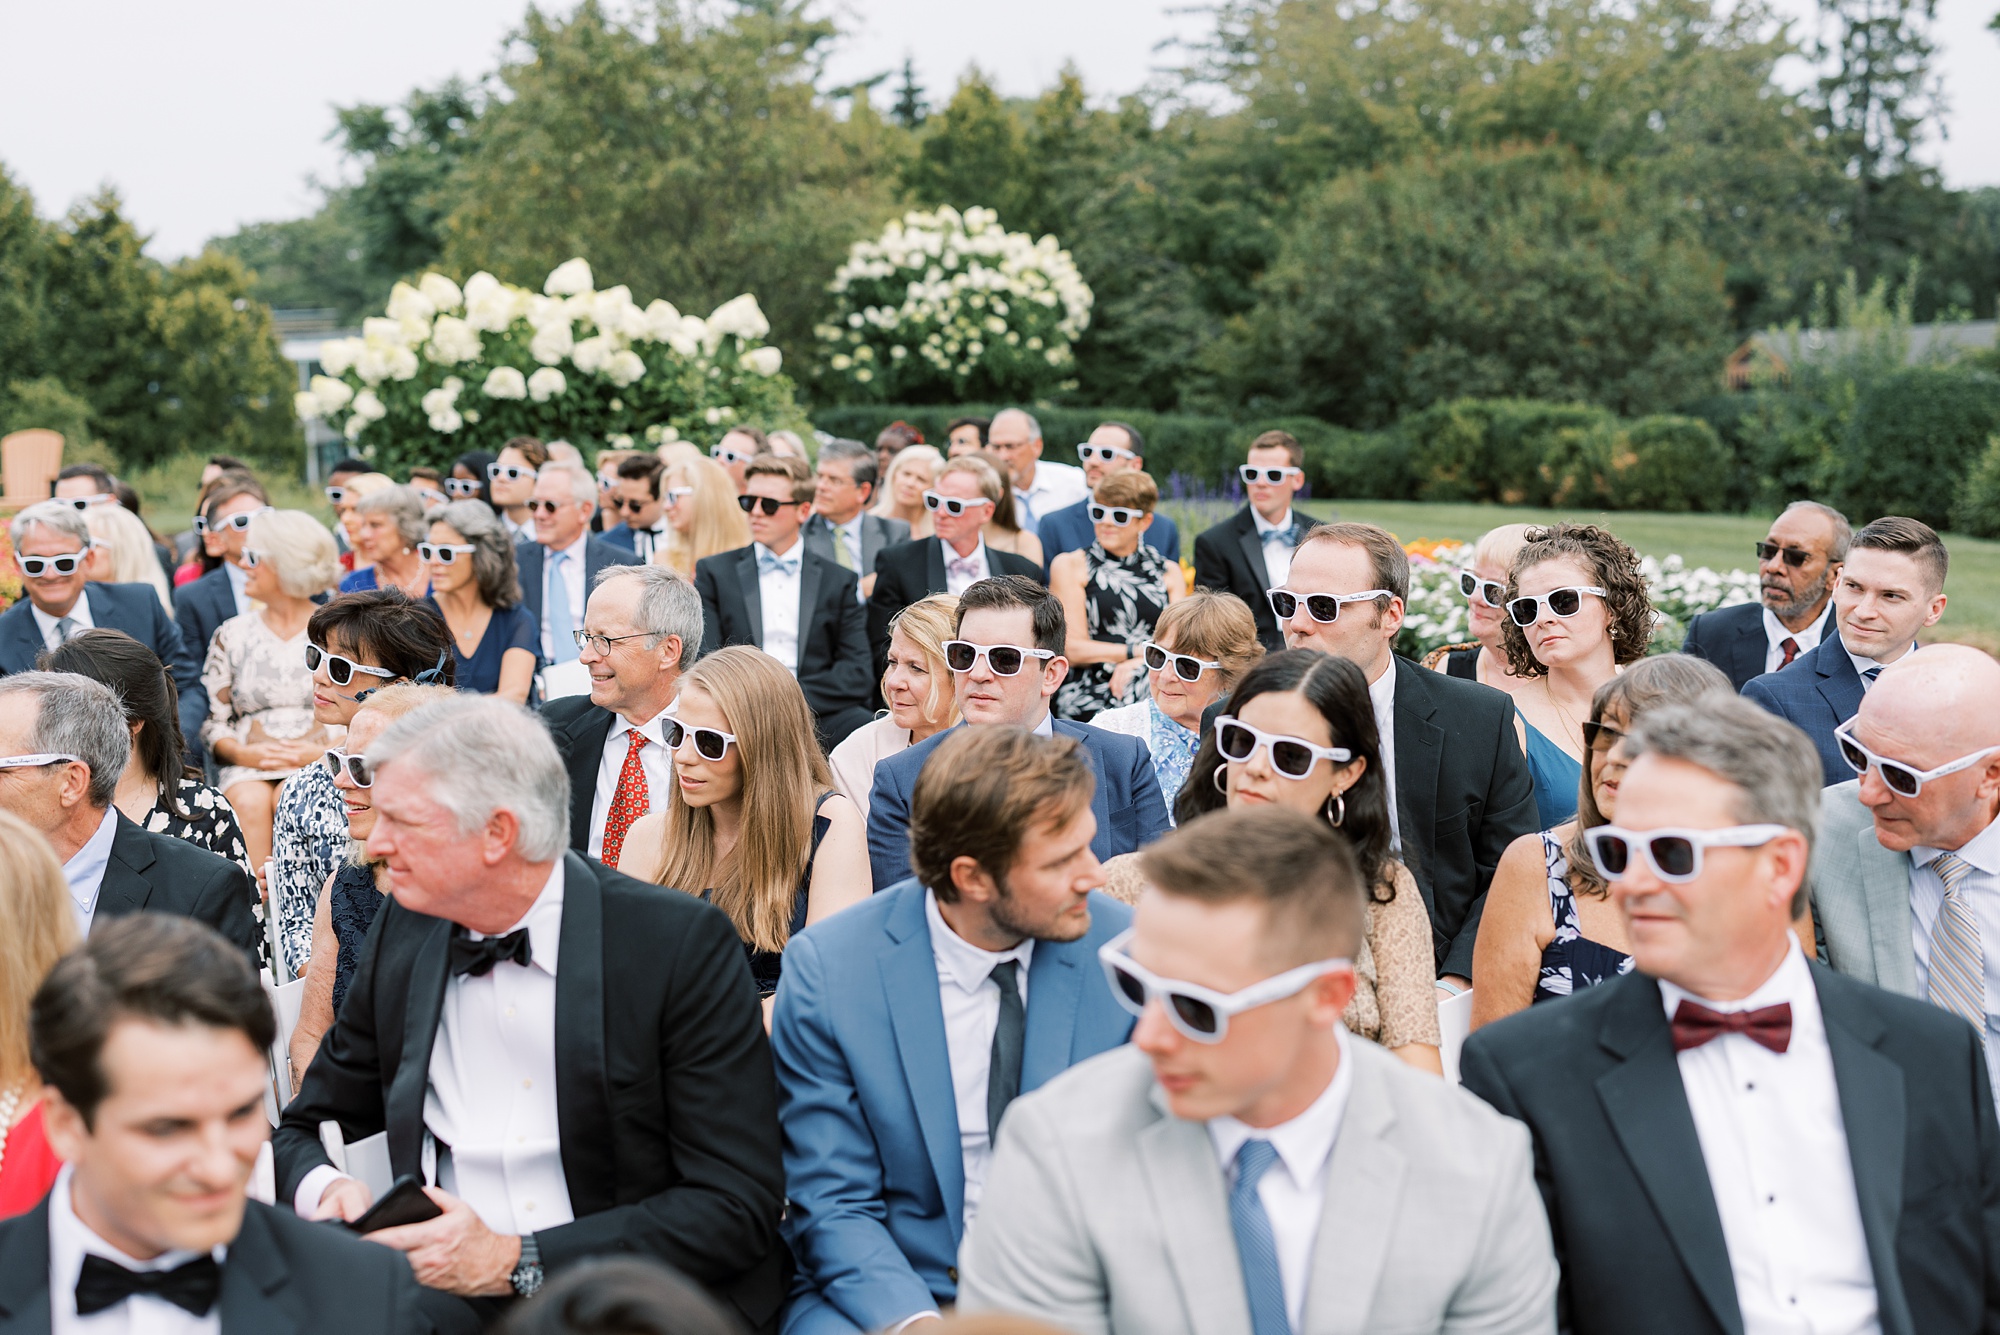 guests wear sunglasses during wedding ceremony on lawn at Skytop Lodge